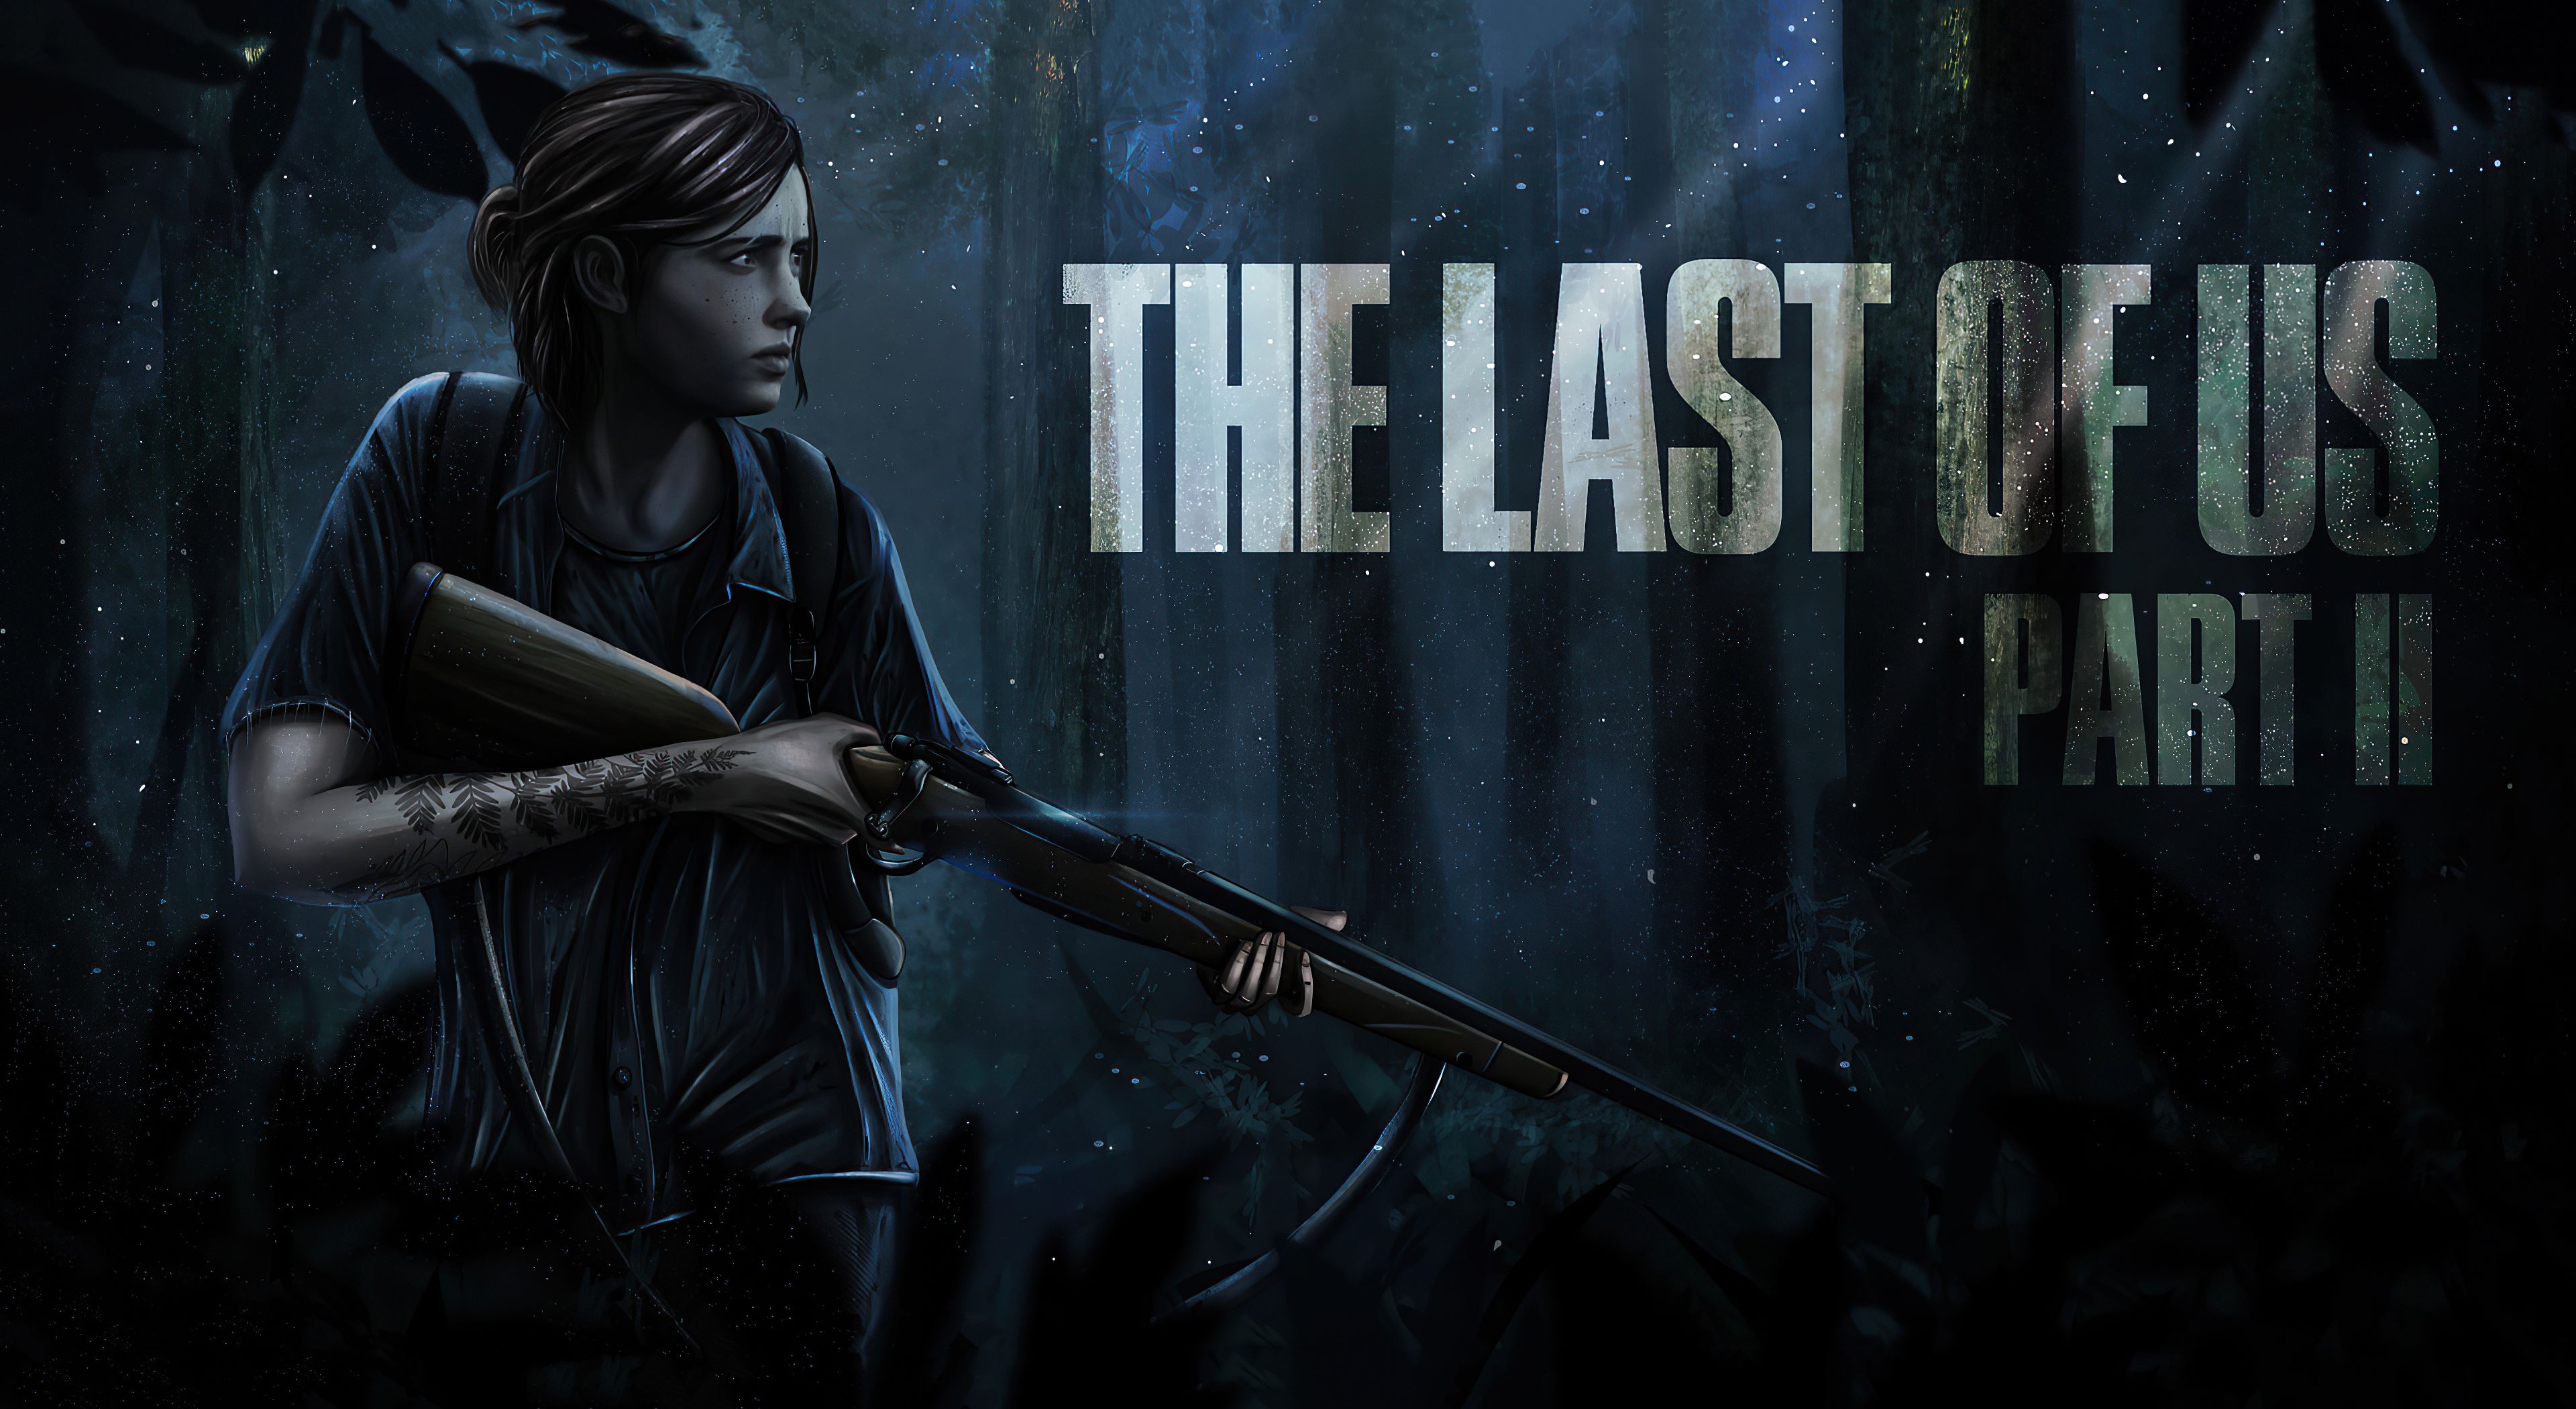 The Last Of Us Part II 4k Artwork, HD Games, 4k Wallpaper, Image, Background, Photo and Picture